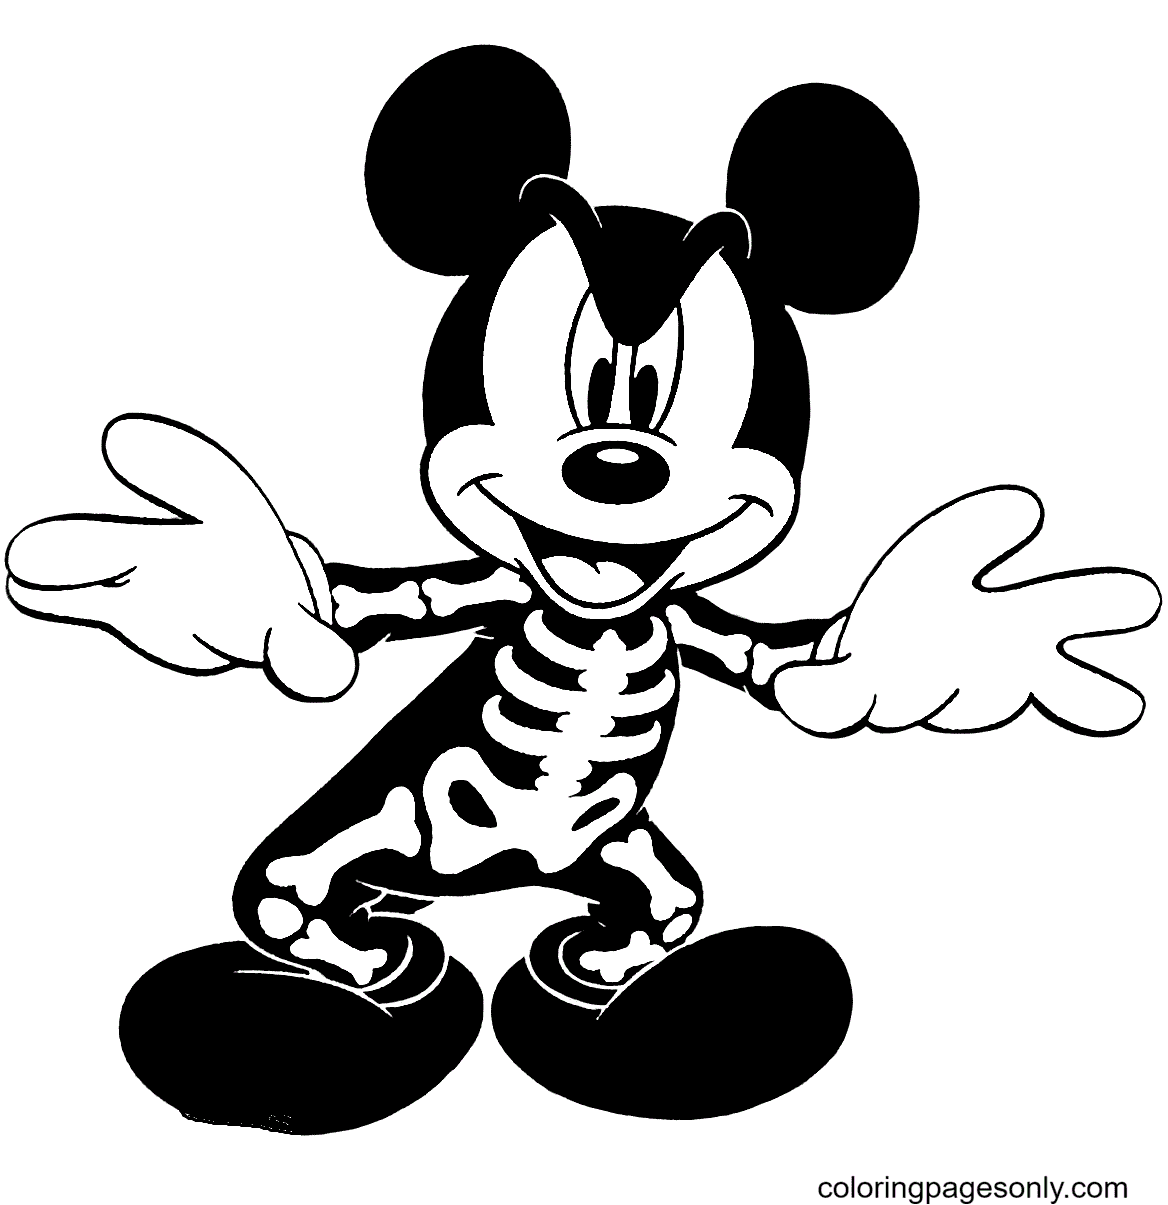 Mickey Mouse as a Skeleton Coloring Pages